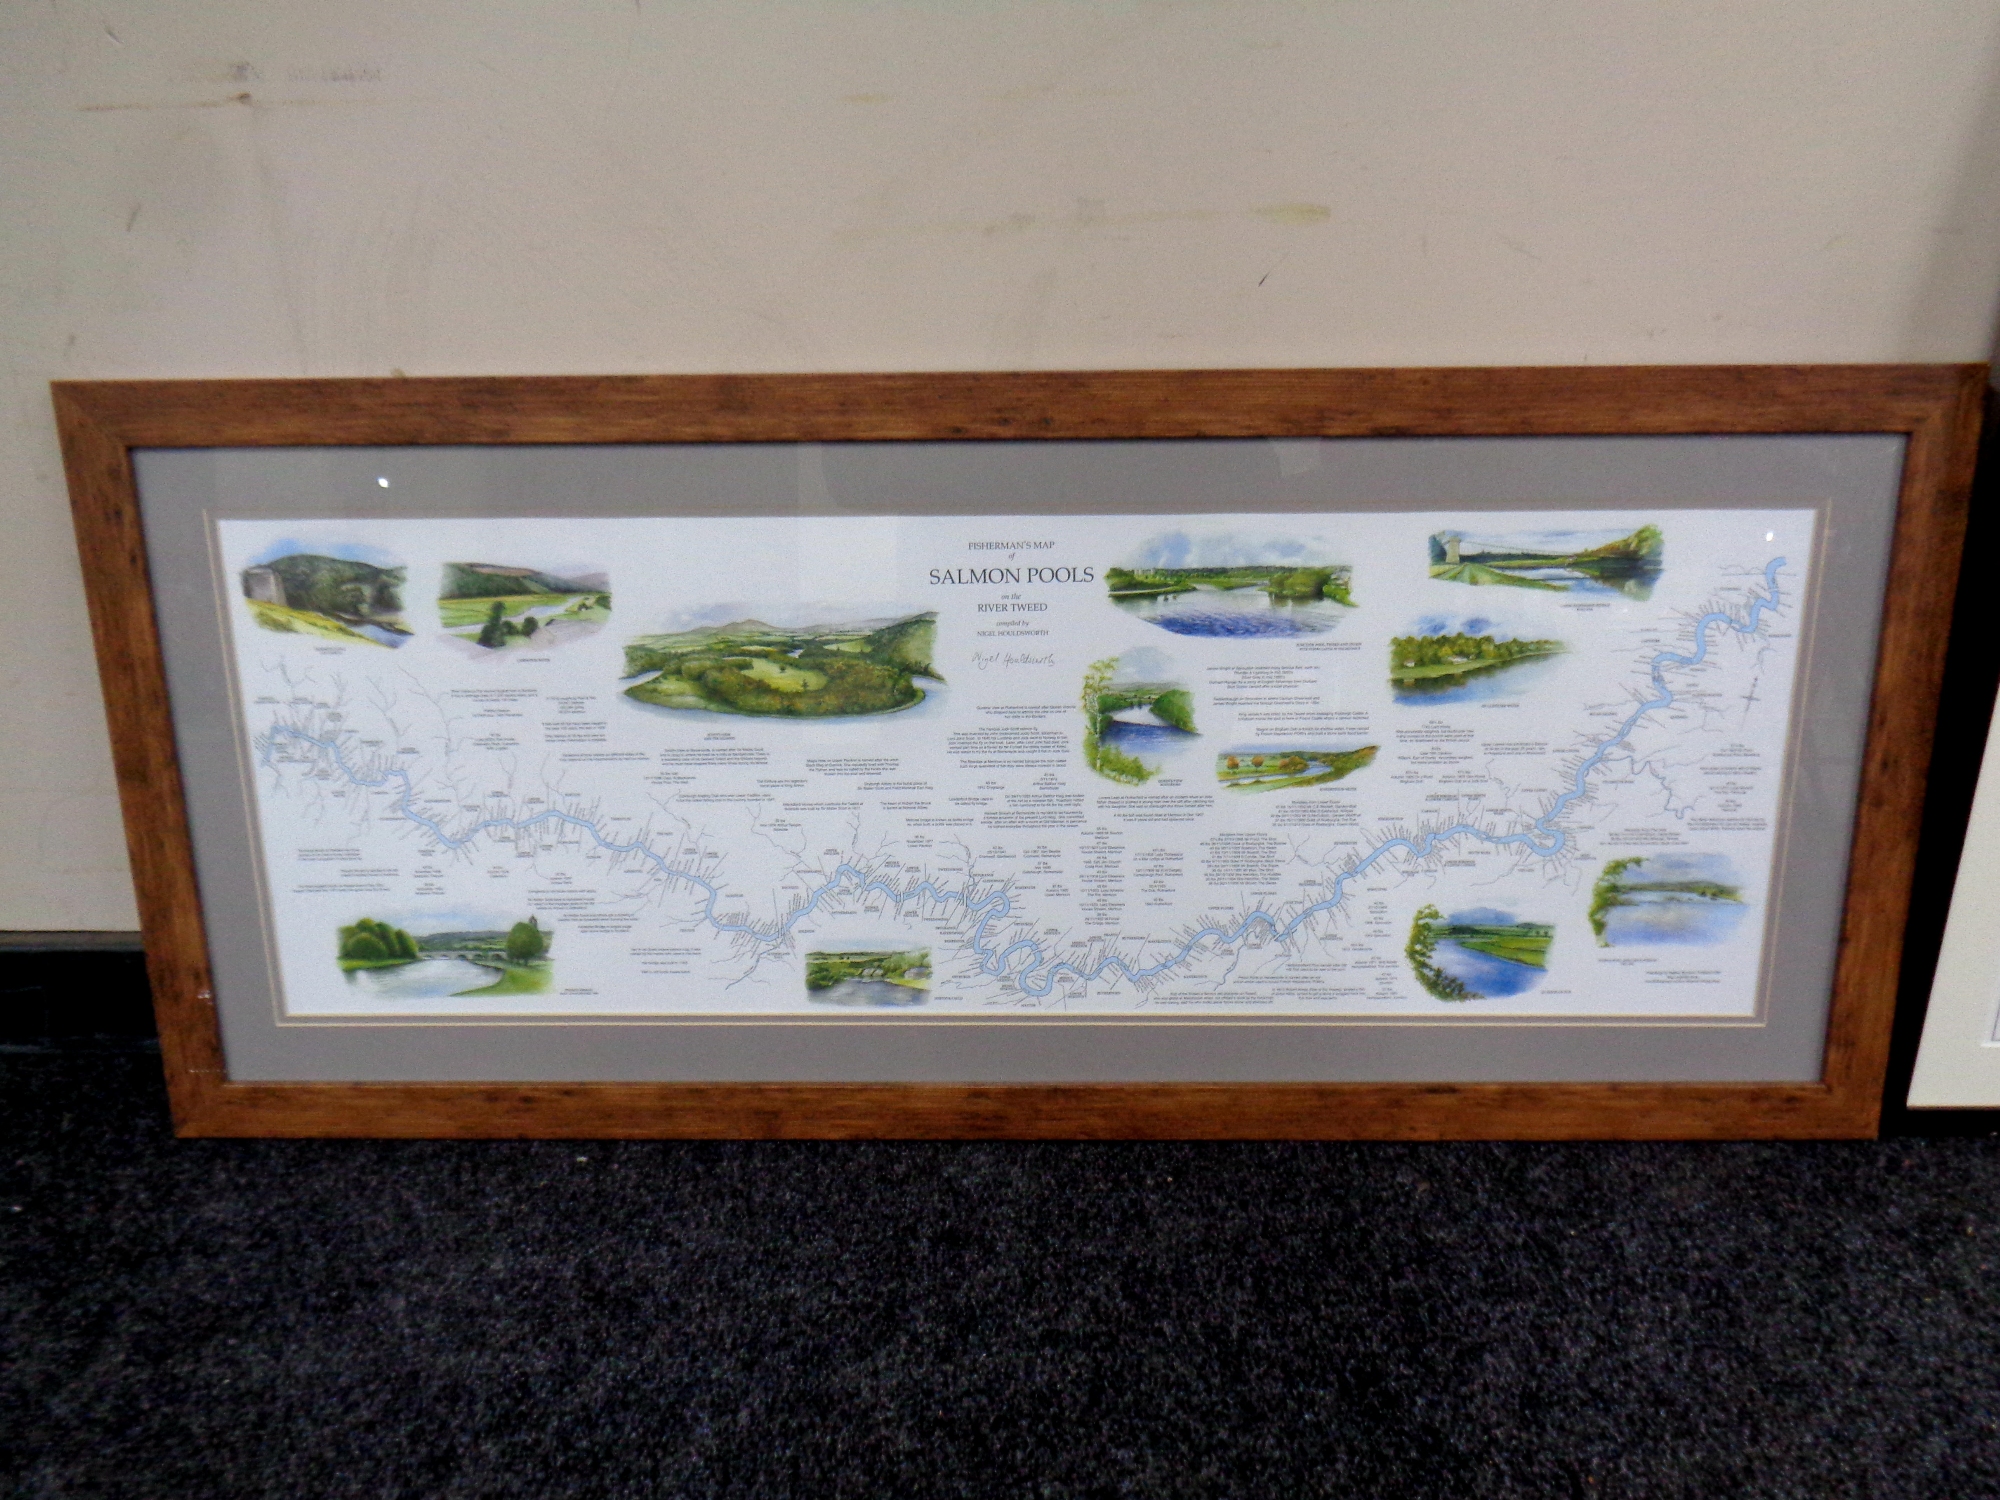 A fisherman's map and salmon pools on the River Tweed compiled by Nigel Houldsworth, - Image 3 of 3